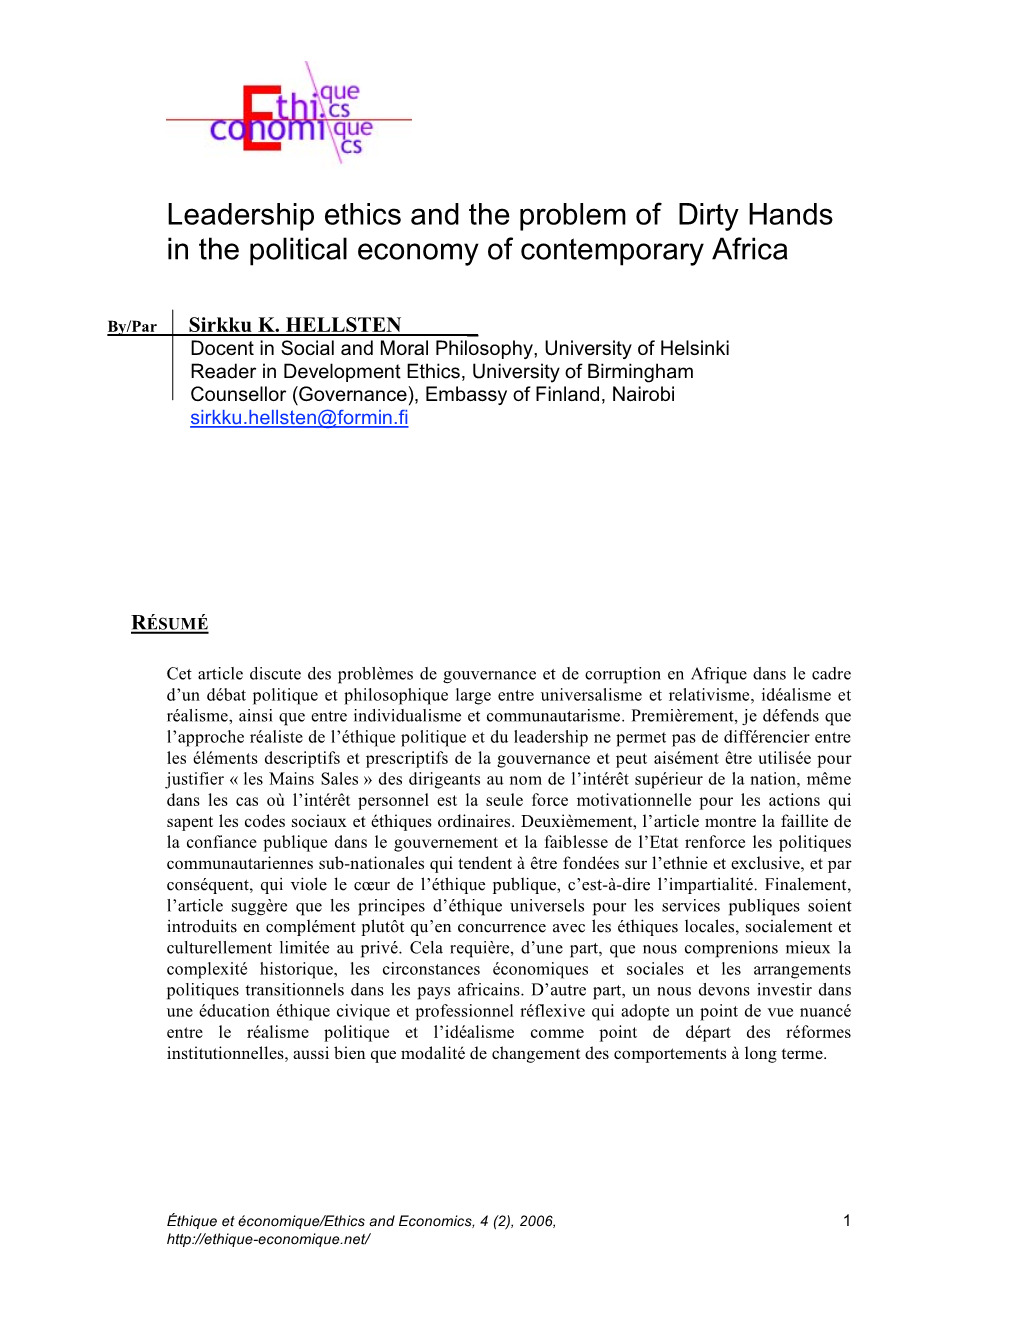 Leadership Ethics and the Problem of Dirty Hands in the Political Economy of Contemporary Africa